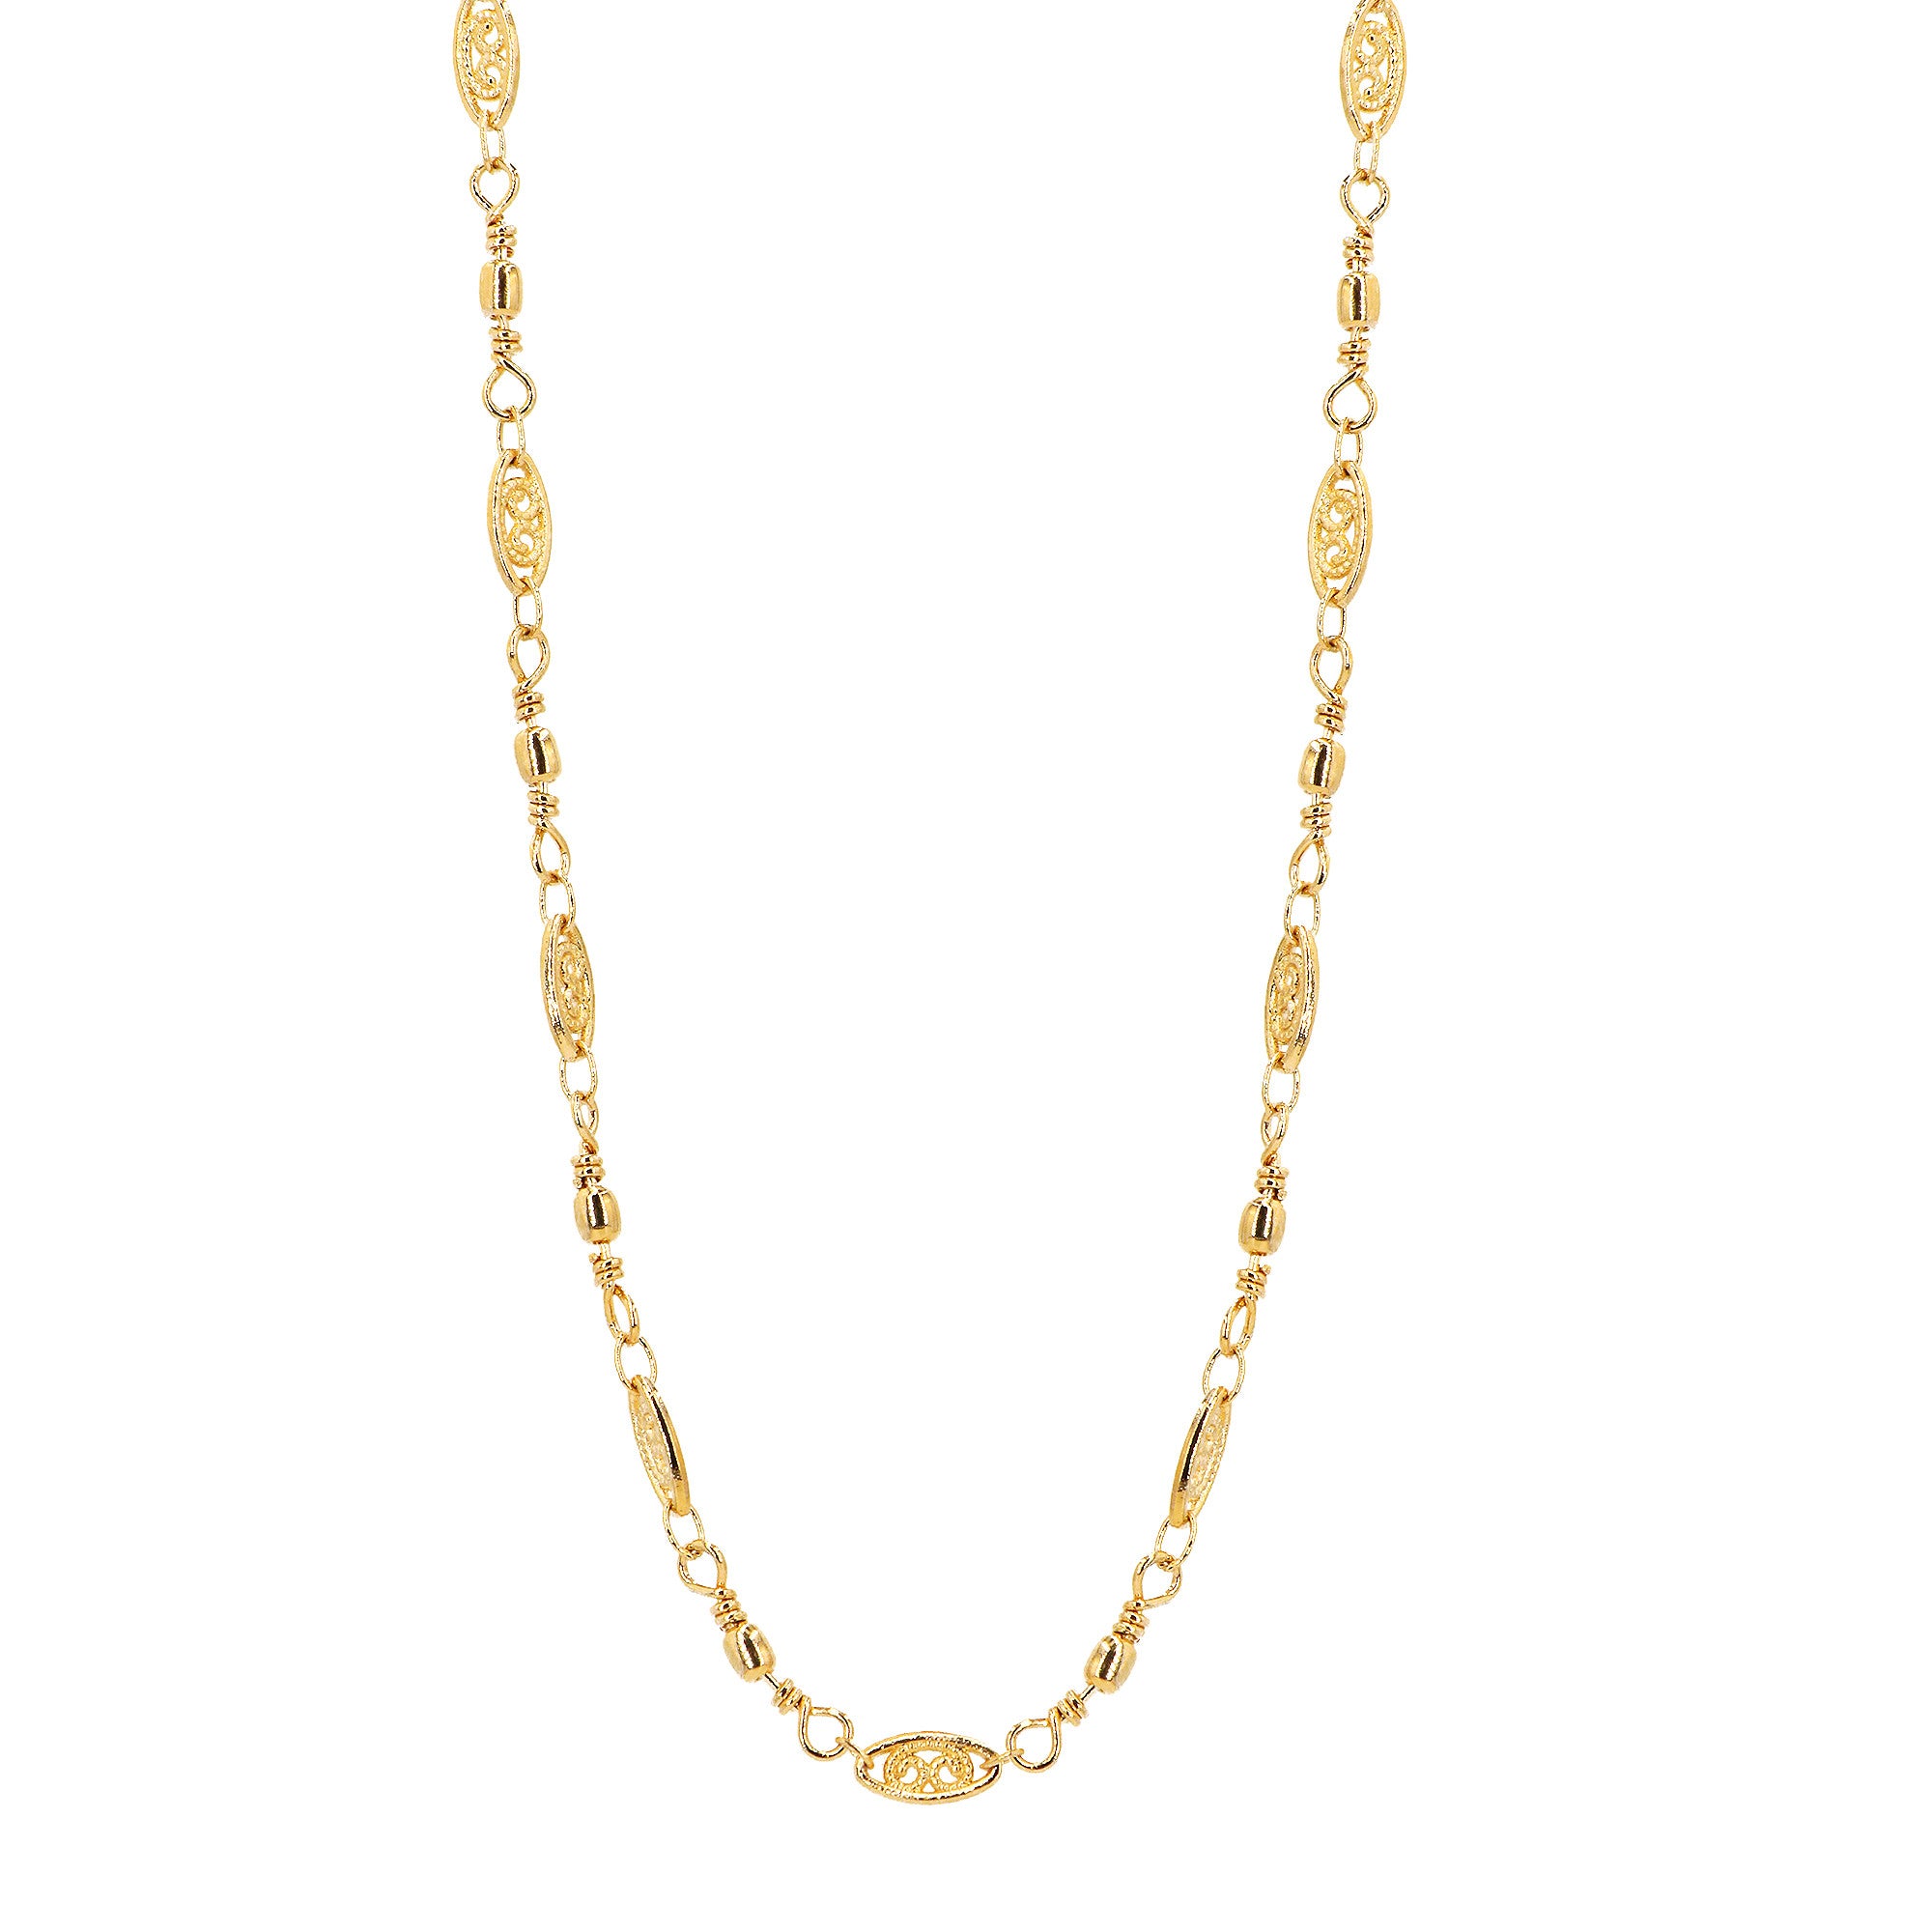 Thalia necklace (3 in 1)